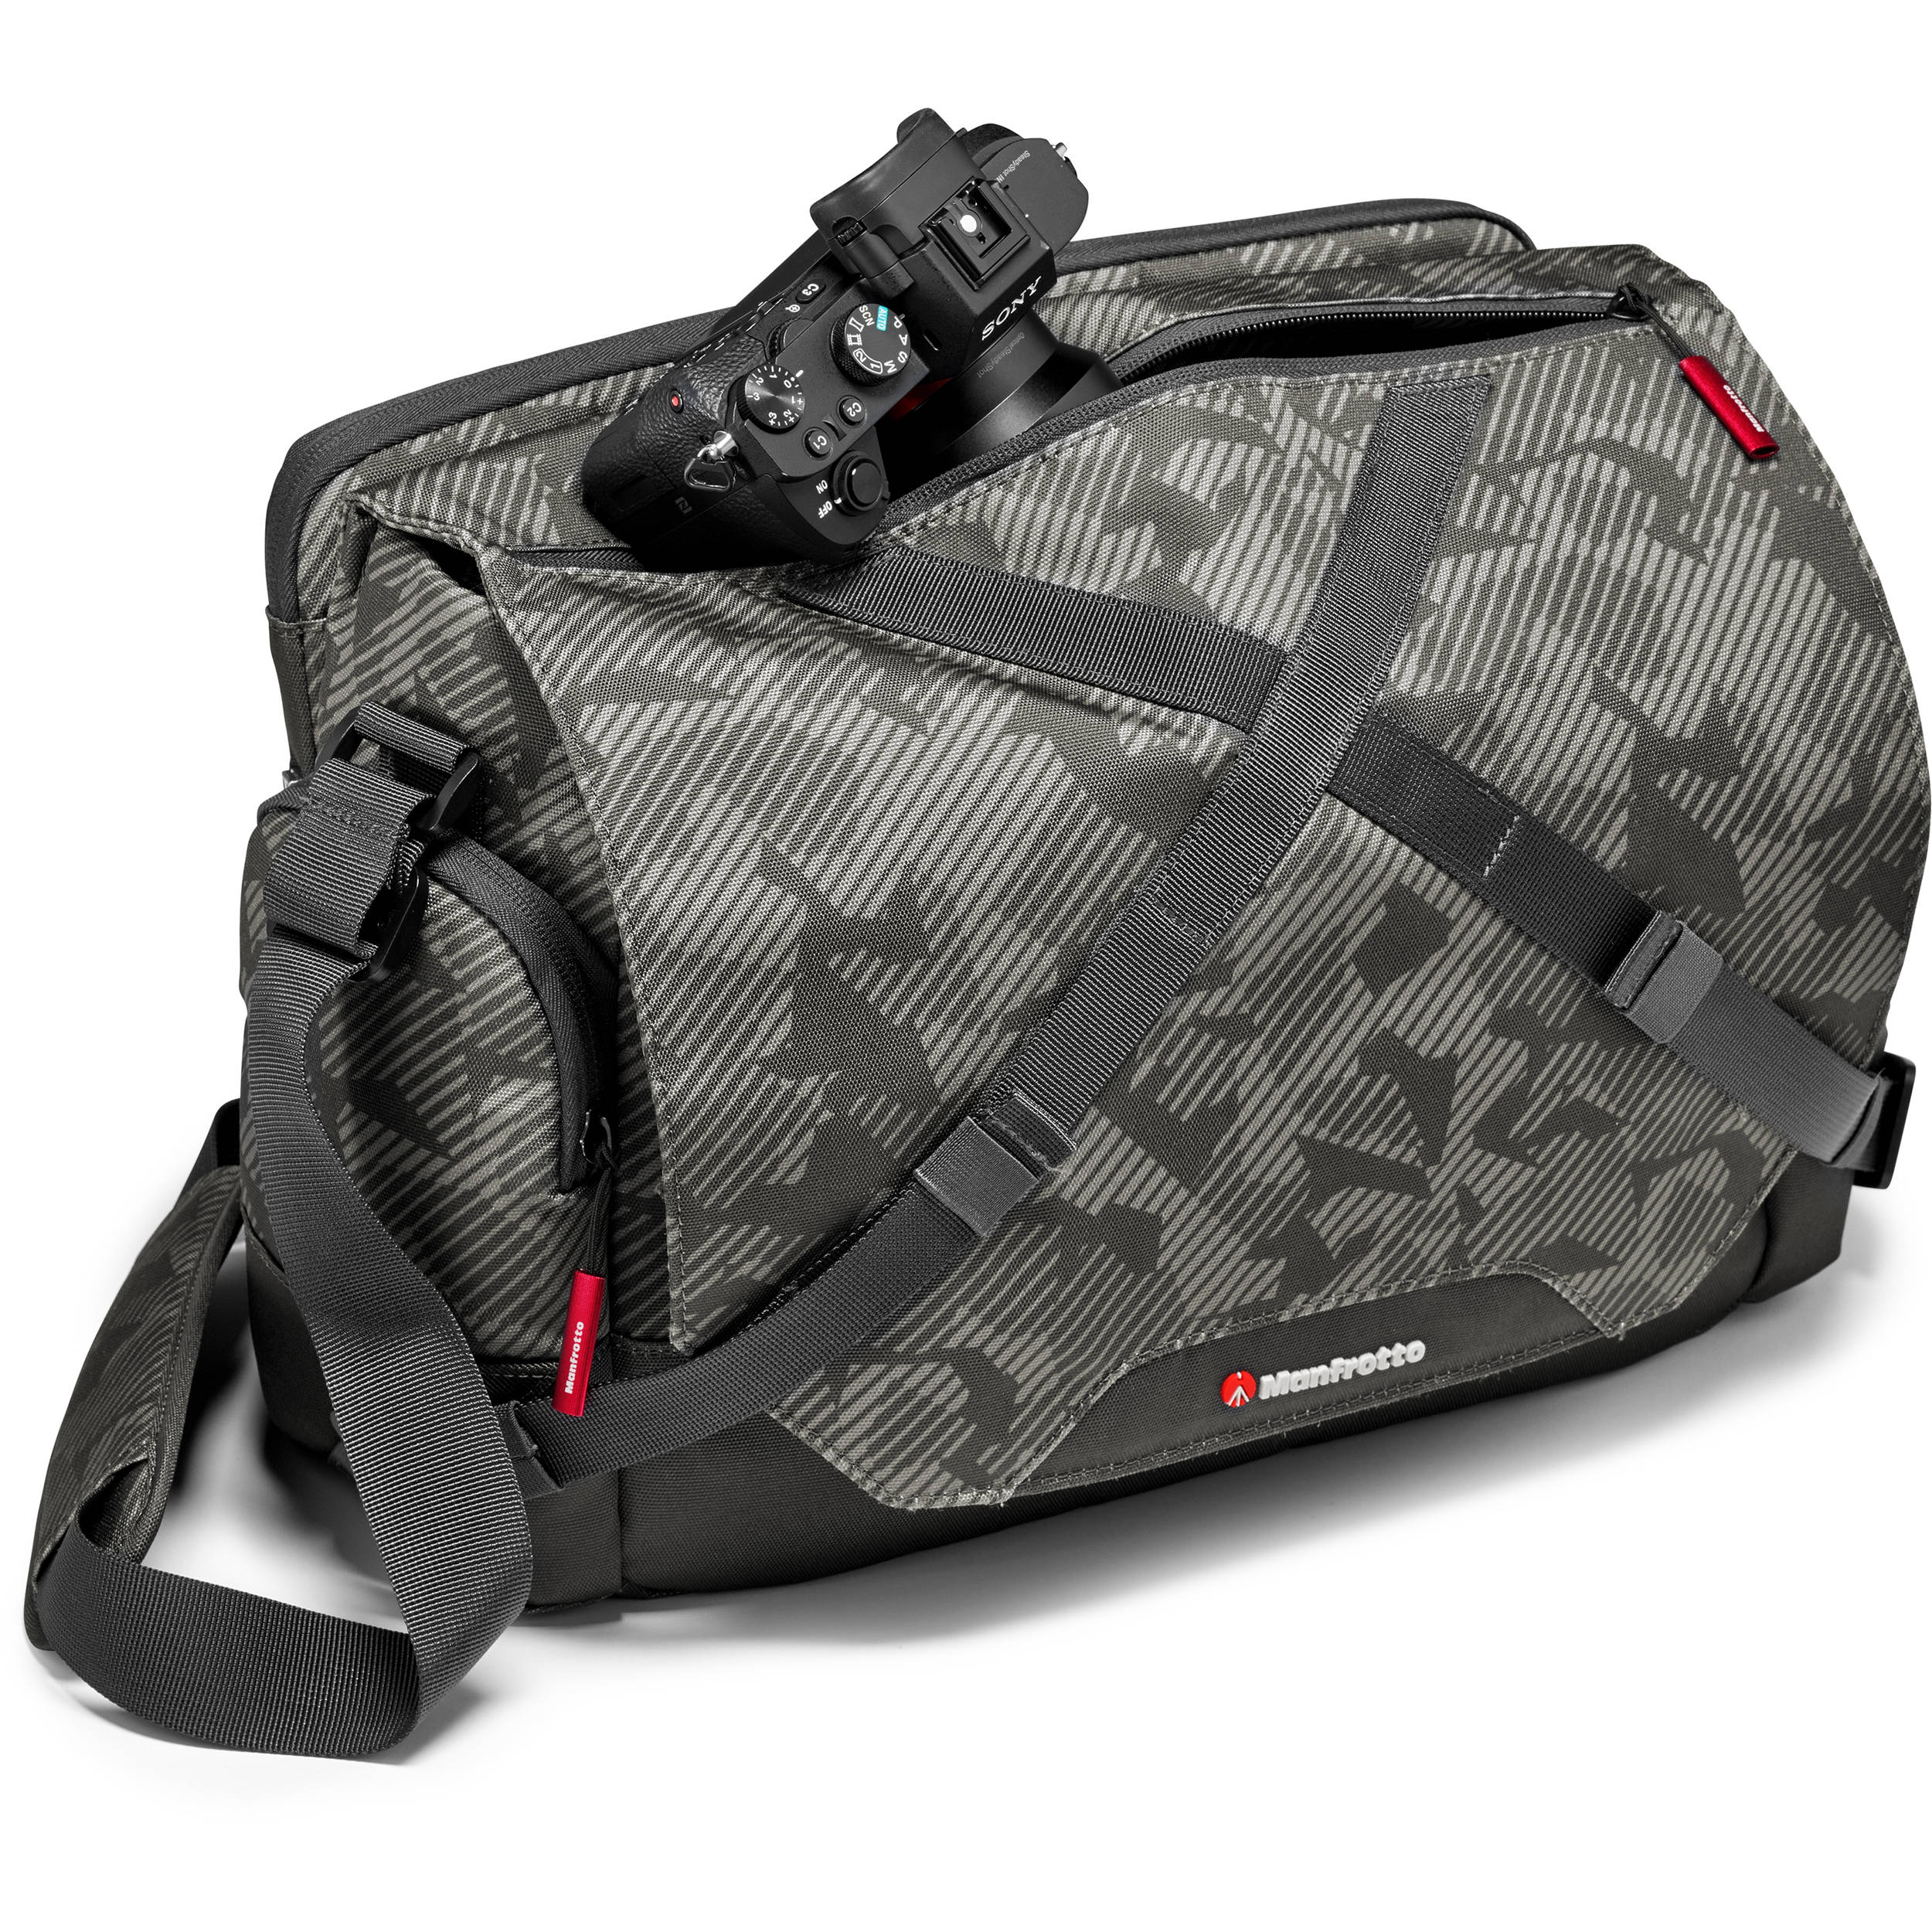 Manfrotto Noreg camera messenger-30 for DSLR/CSC